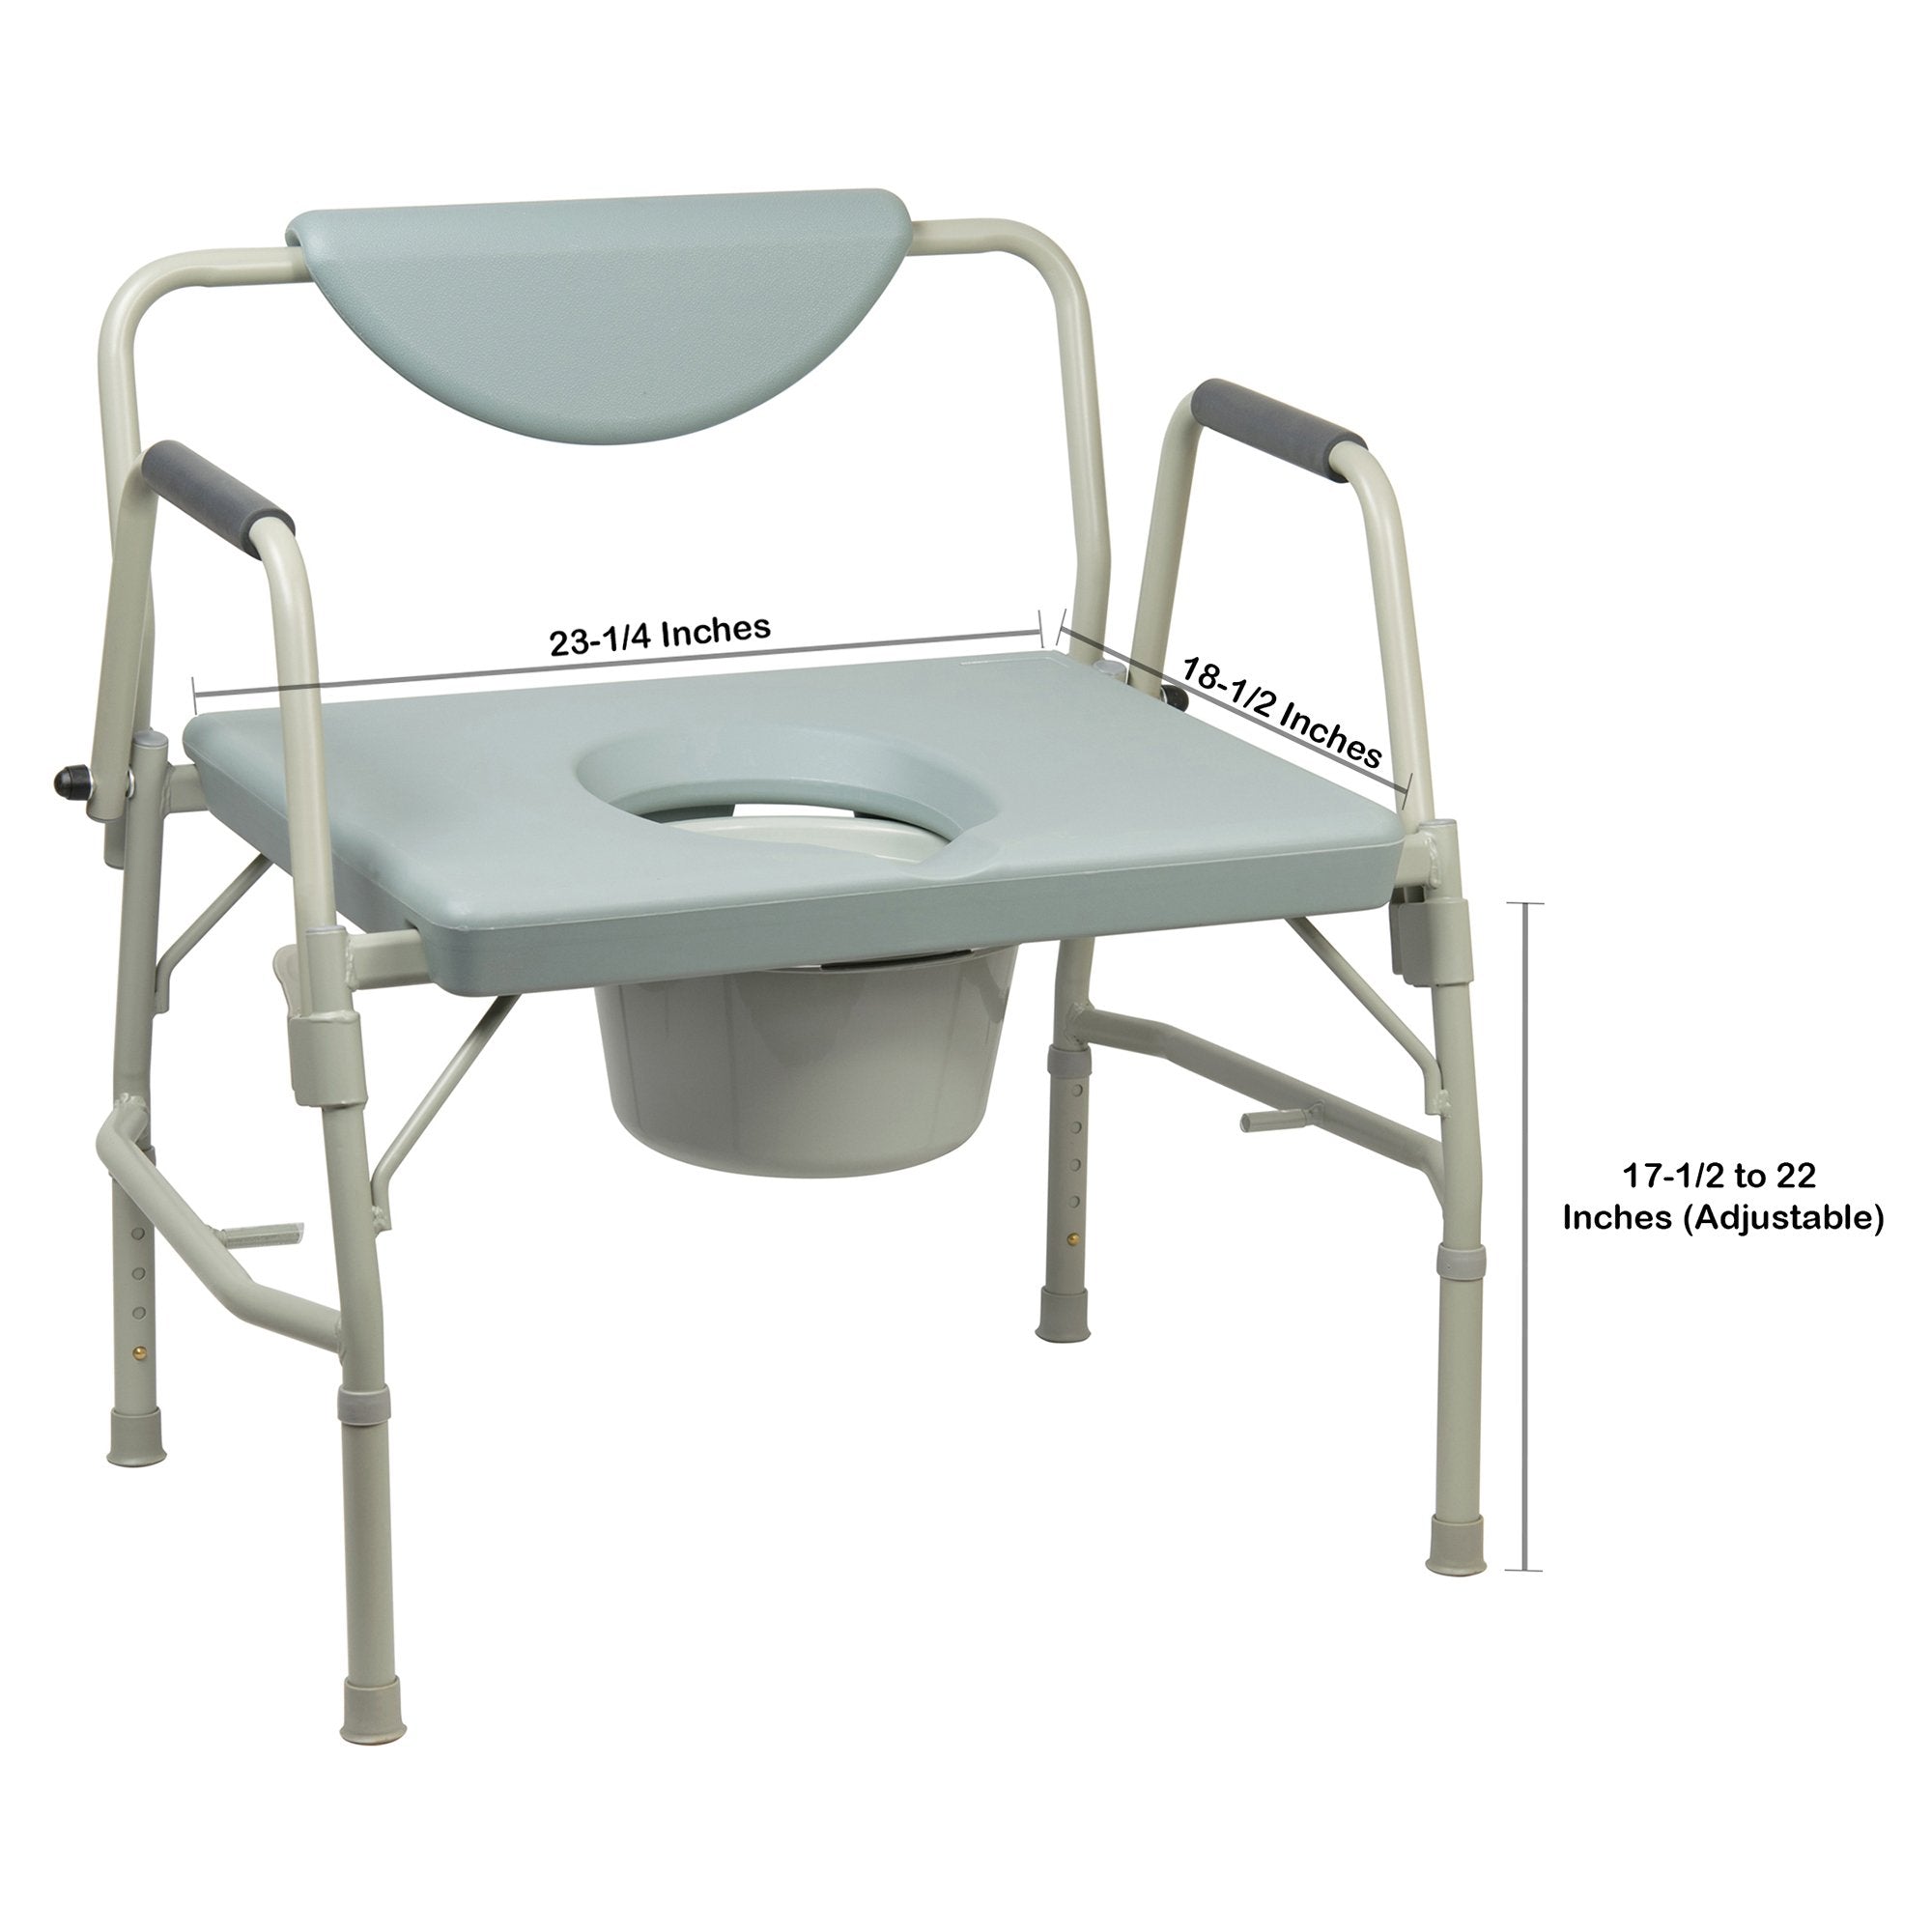 Commode Chair McKesson Drop Arms Steel Frame Padded Backrest 23-1/4 Inch Seat Width 1,000 lbs. Weight Capacity